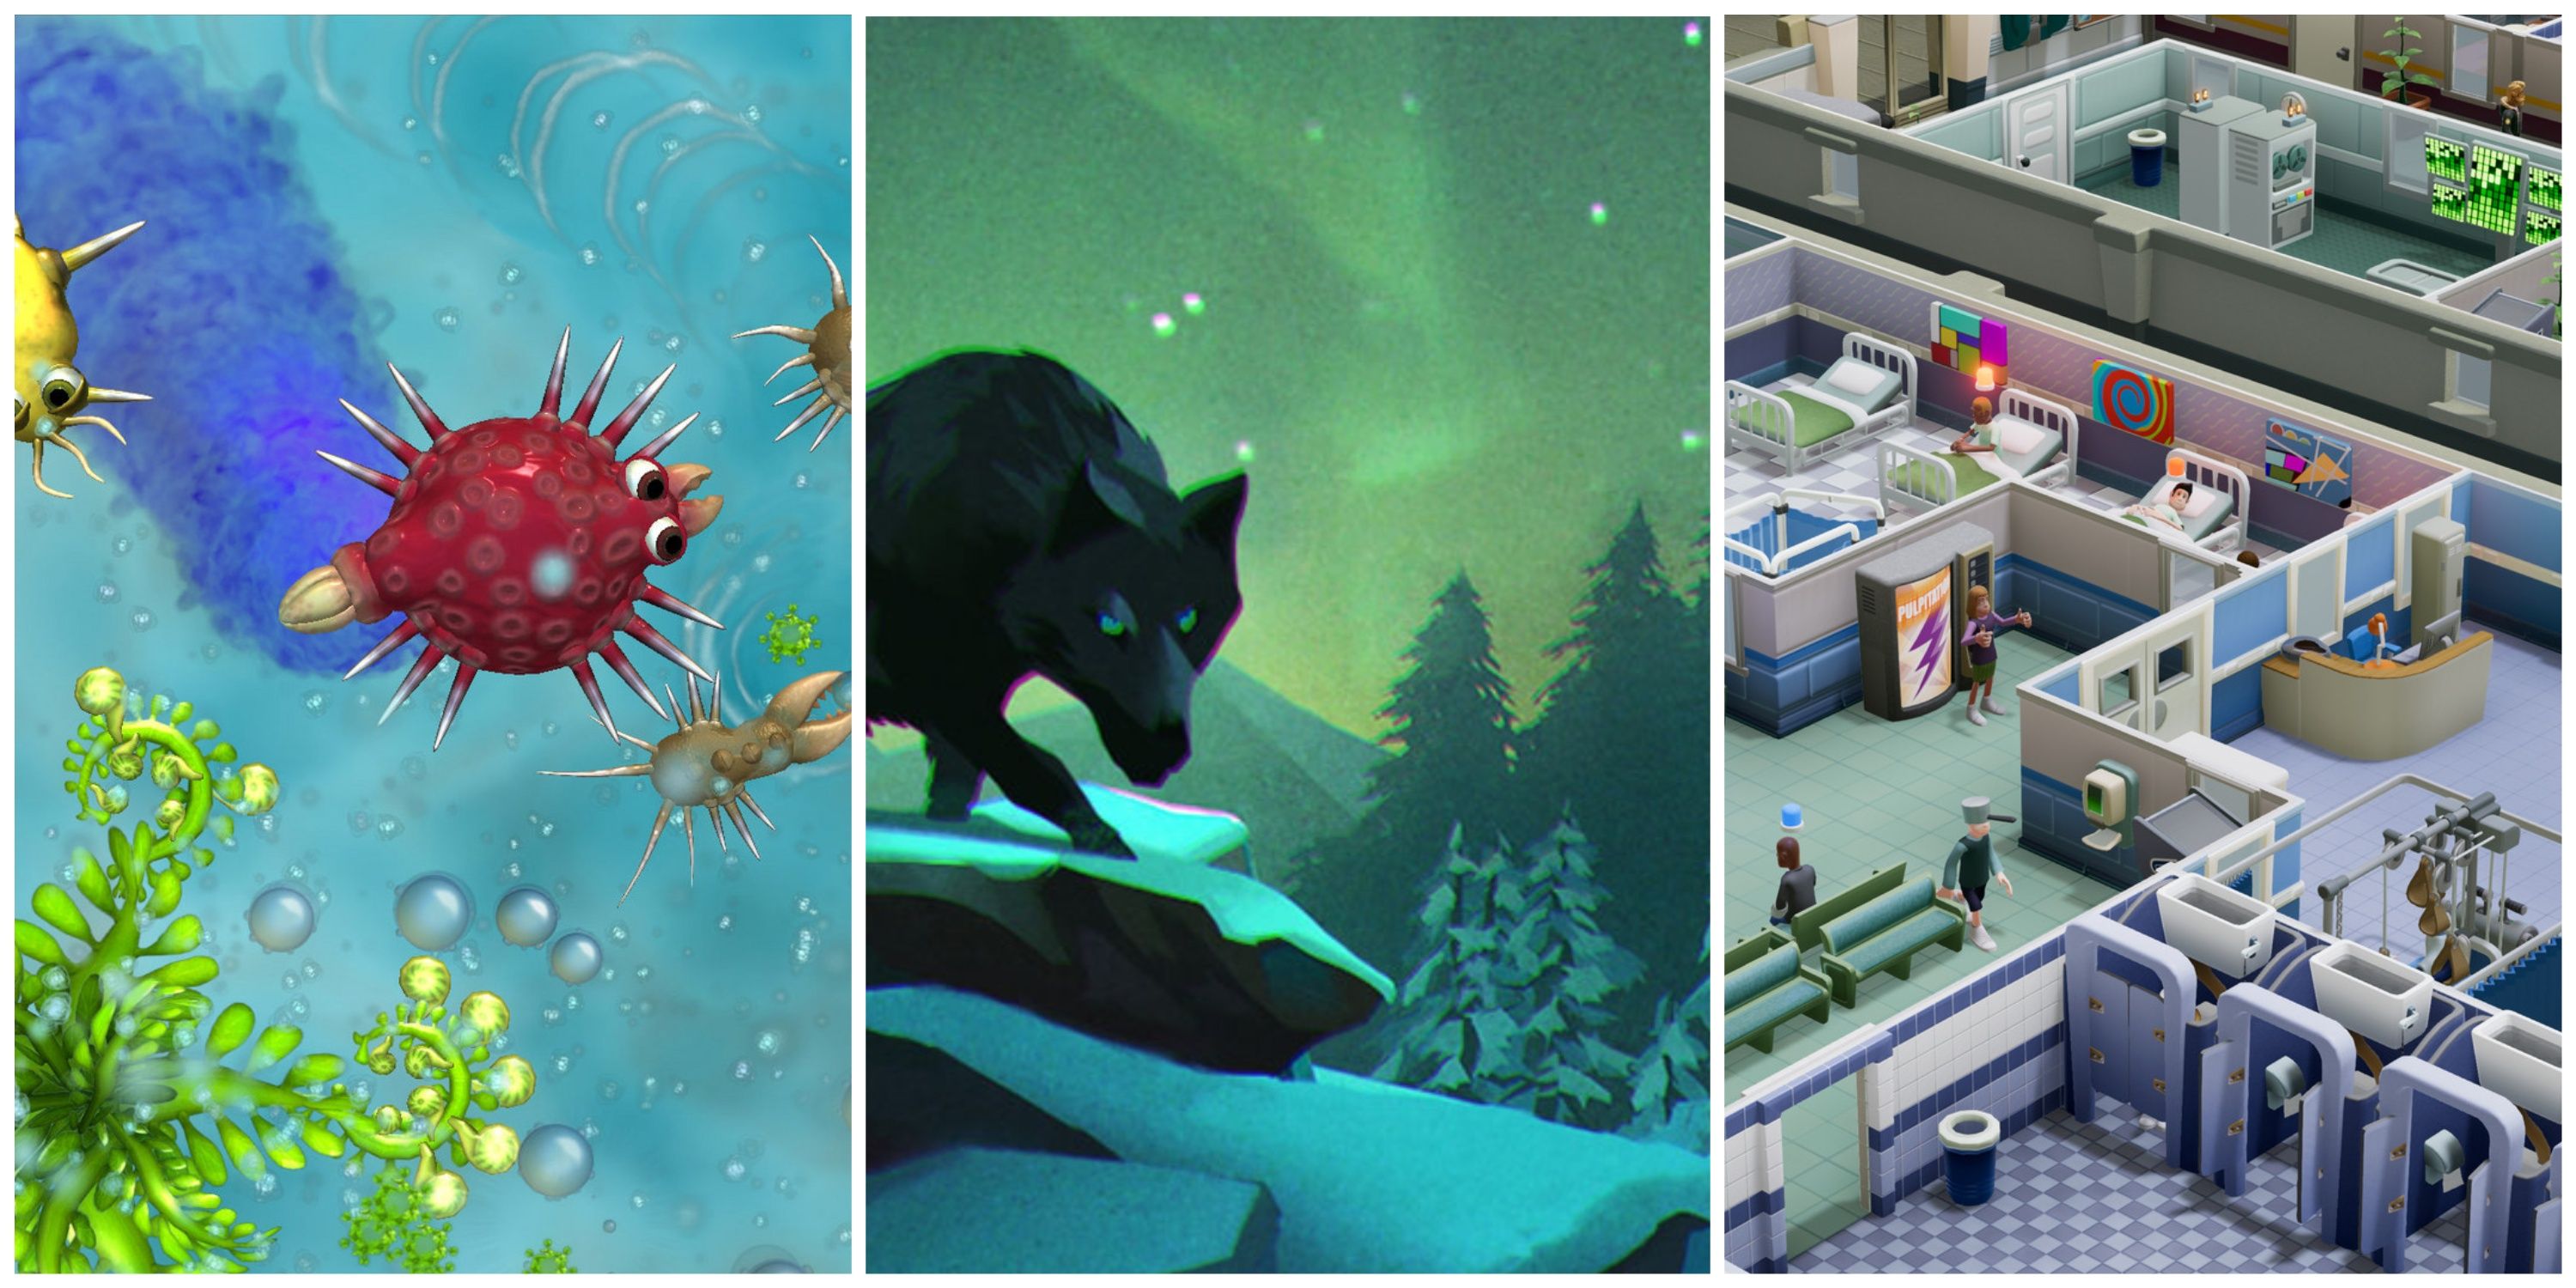 Simulation Games For Beginners Featured Image - Spore + The Long Dark + Two Point Hospital